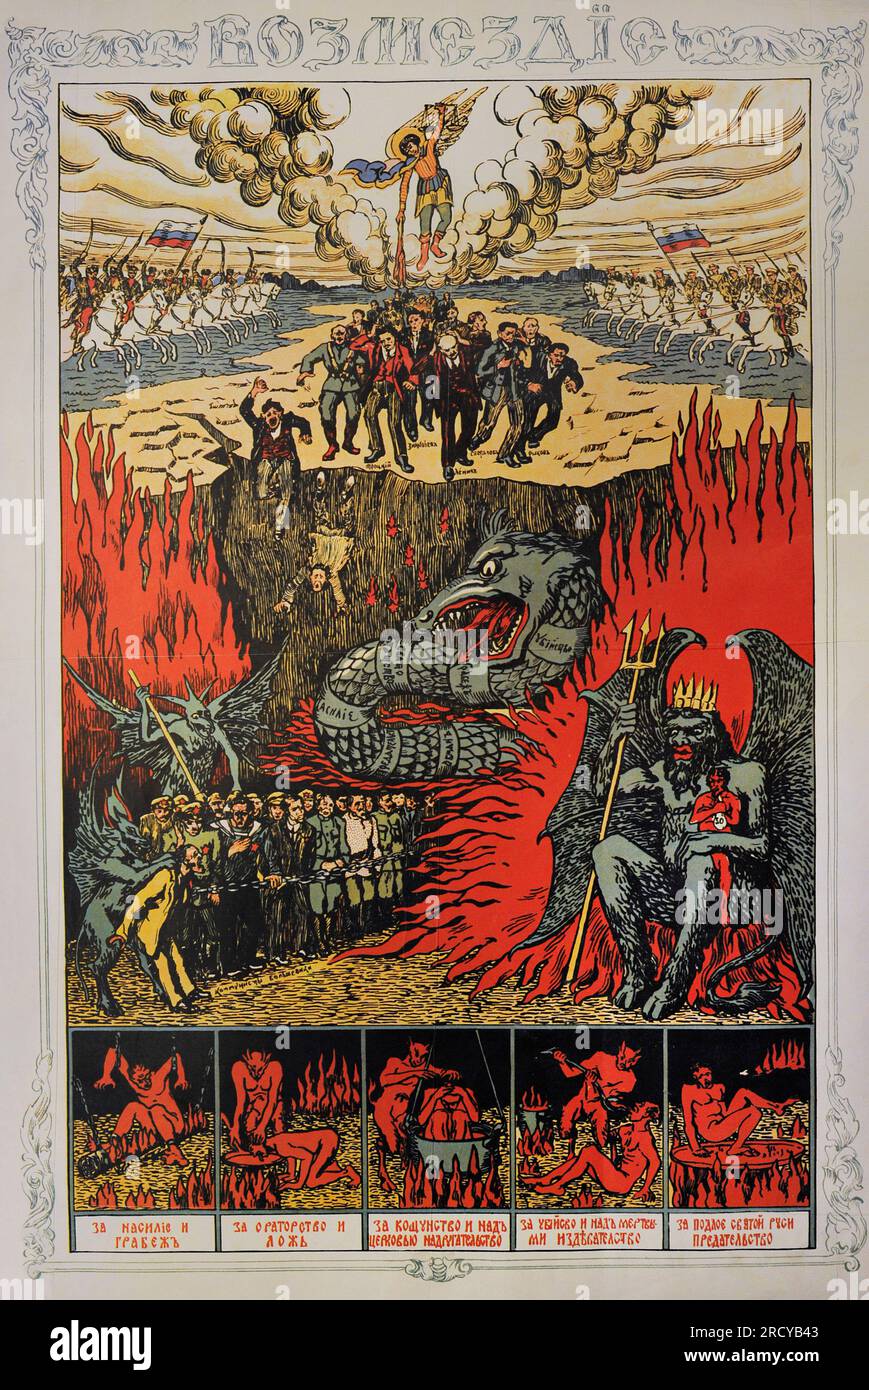 Russian Civil War (1917-19123). Poster directed against Soviet rule 'Vengeance', issued by the Southern anti-Bolshevik armies, 1918-1920. The Bolsheviks the place in hell. Unknown author. Stock Photo